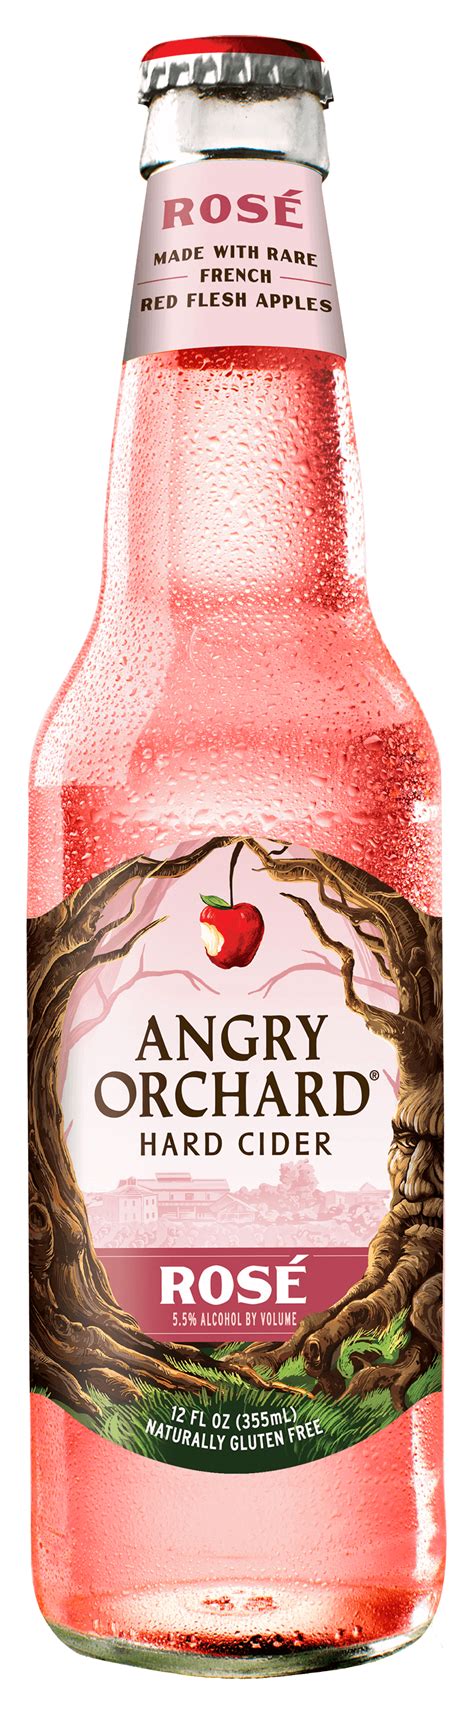 Angry Orchard Rosé commercials